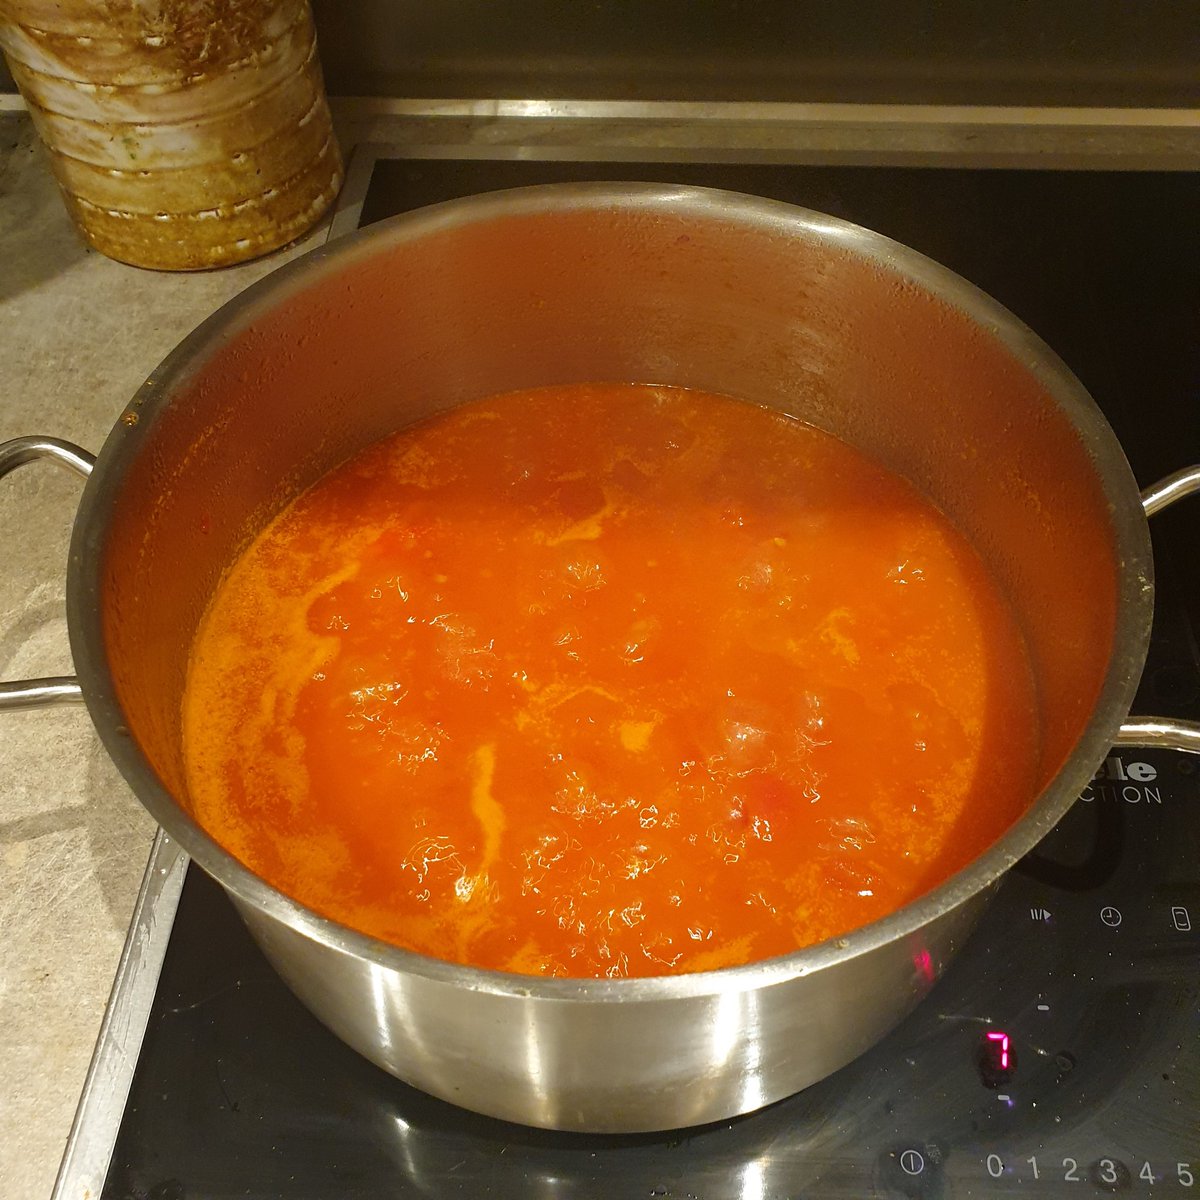 much more regular liquid now but a long way to go. tomato flavour should be starting to make its presence felt now. remember to stir. also scrape any residue that forms on sides of pan during reduction back into mix. big flavour